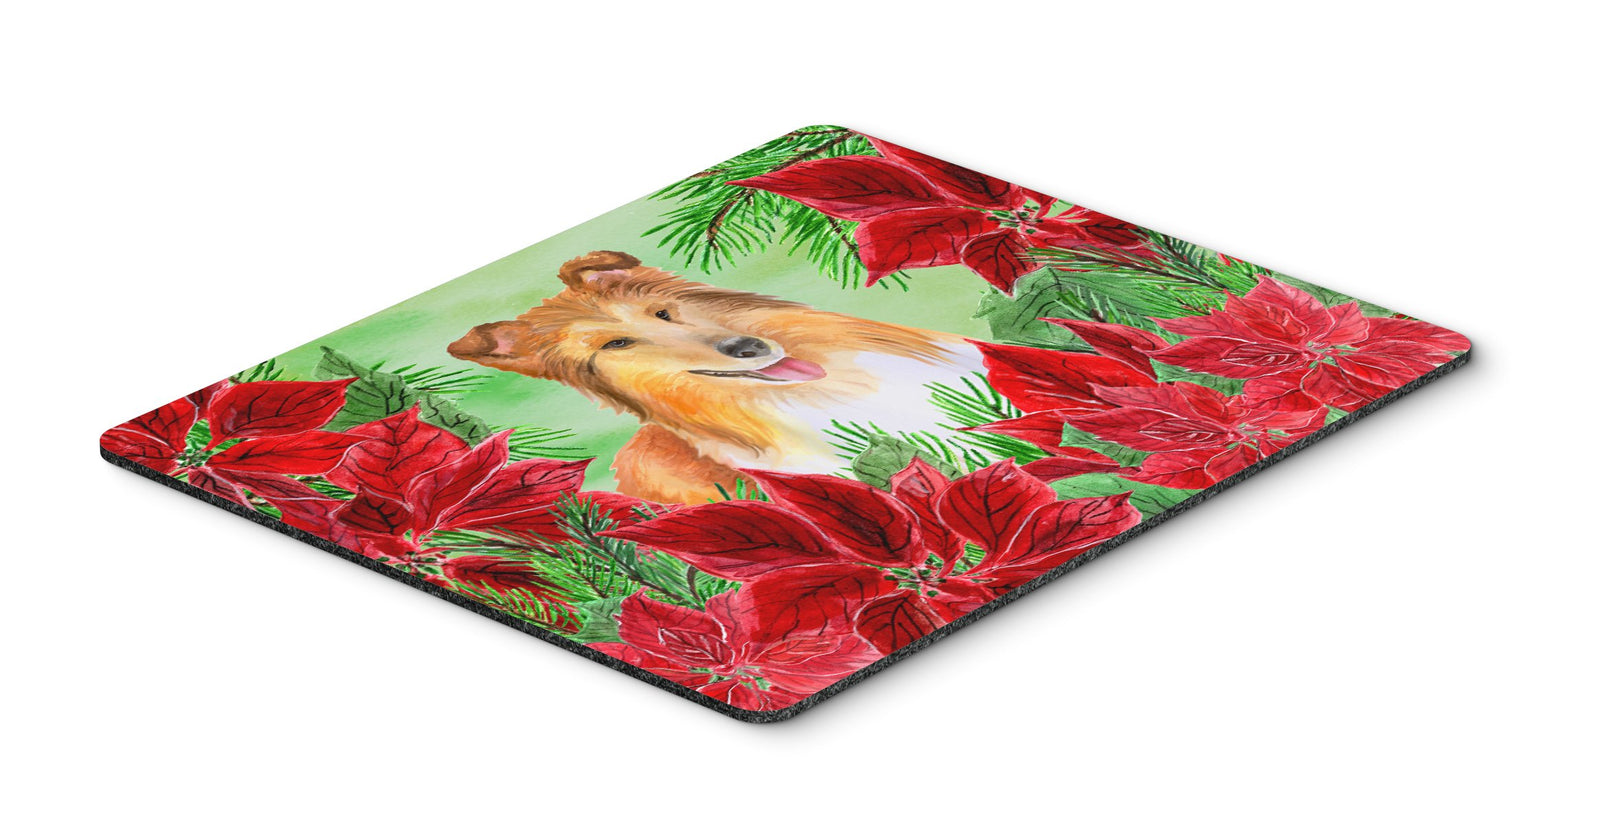 Sheltie Poinsettas Mouse Pad, Hot Pad or Trivet CK1367MP by Caroline's Treasures